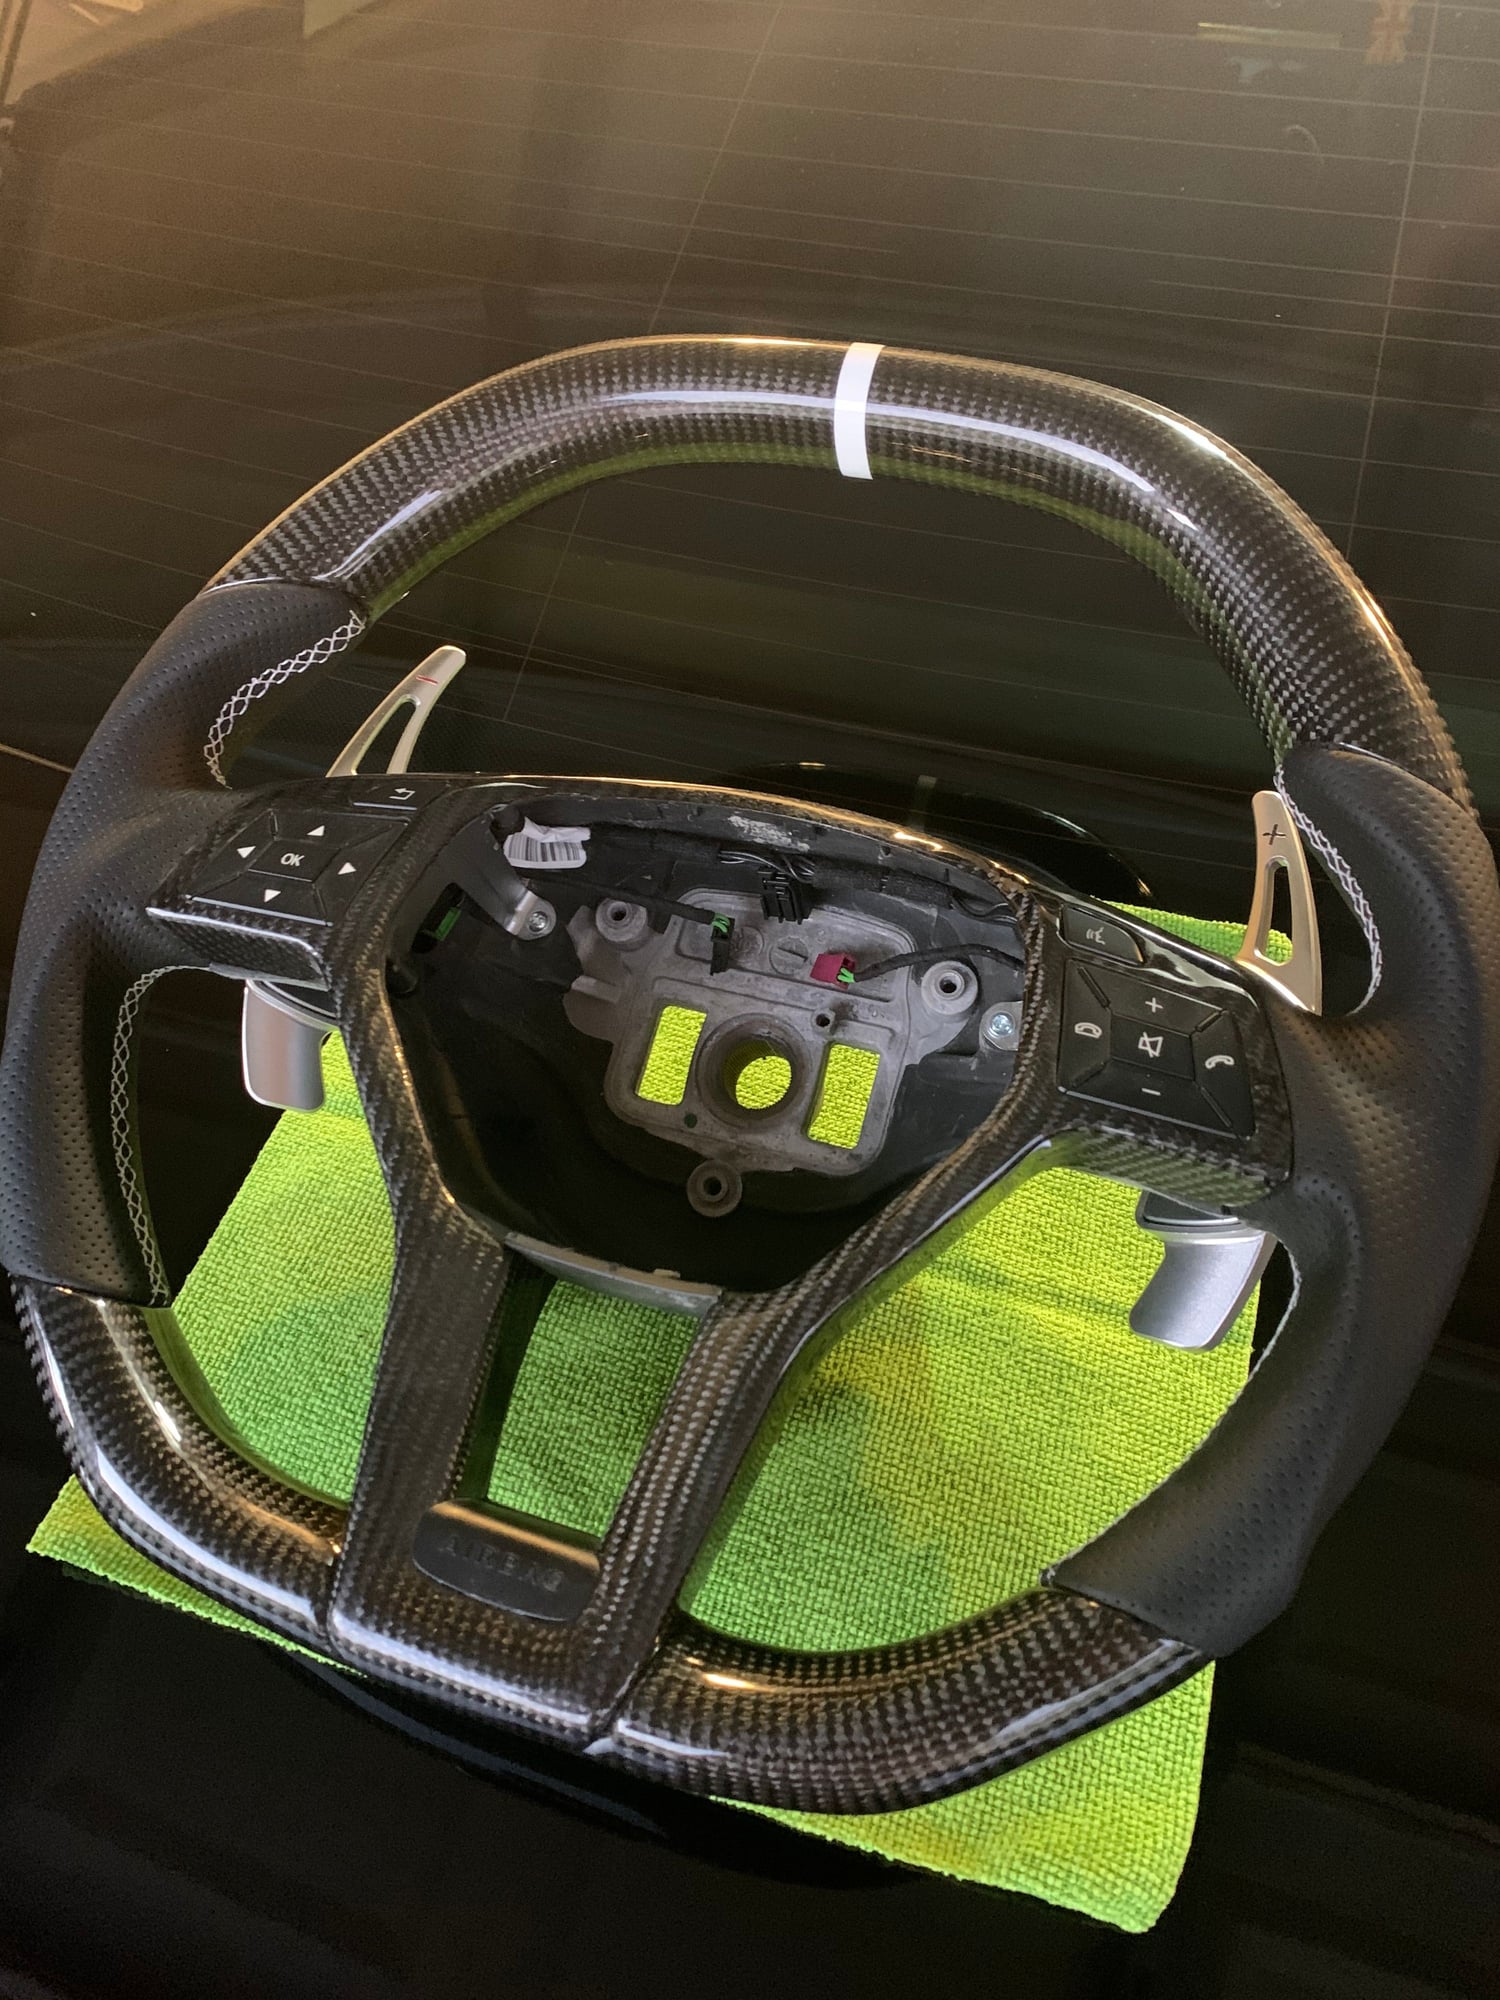 Interior/Upholstery - New AMG Carbon Fiber Steering Wheel - New - 2012 to 2017  All Models - Miami, FL 33101, United States